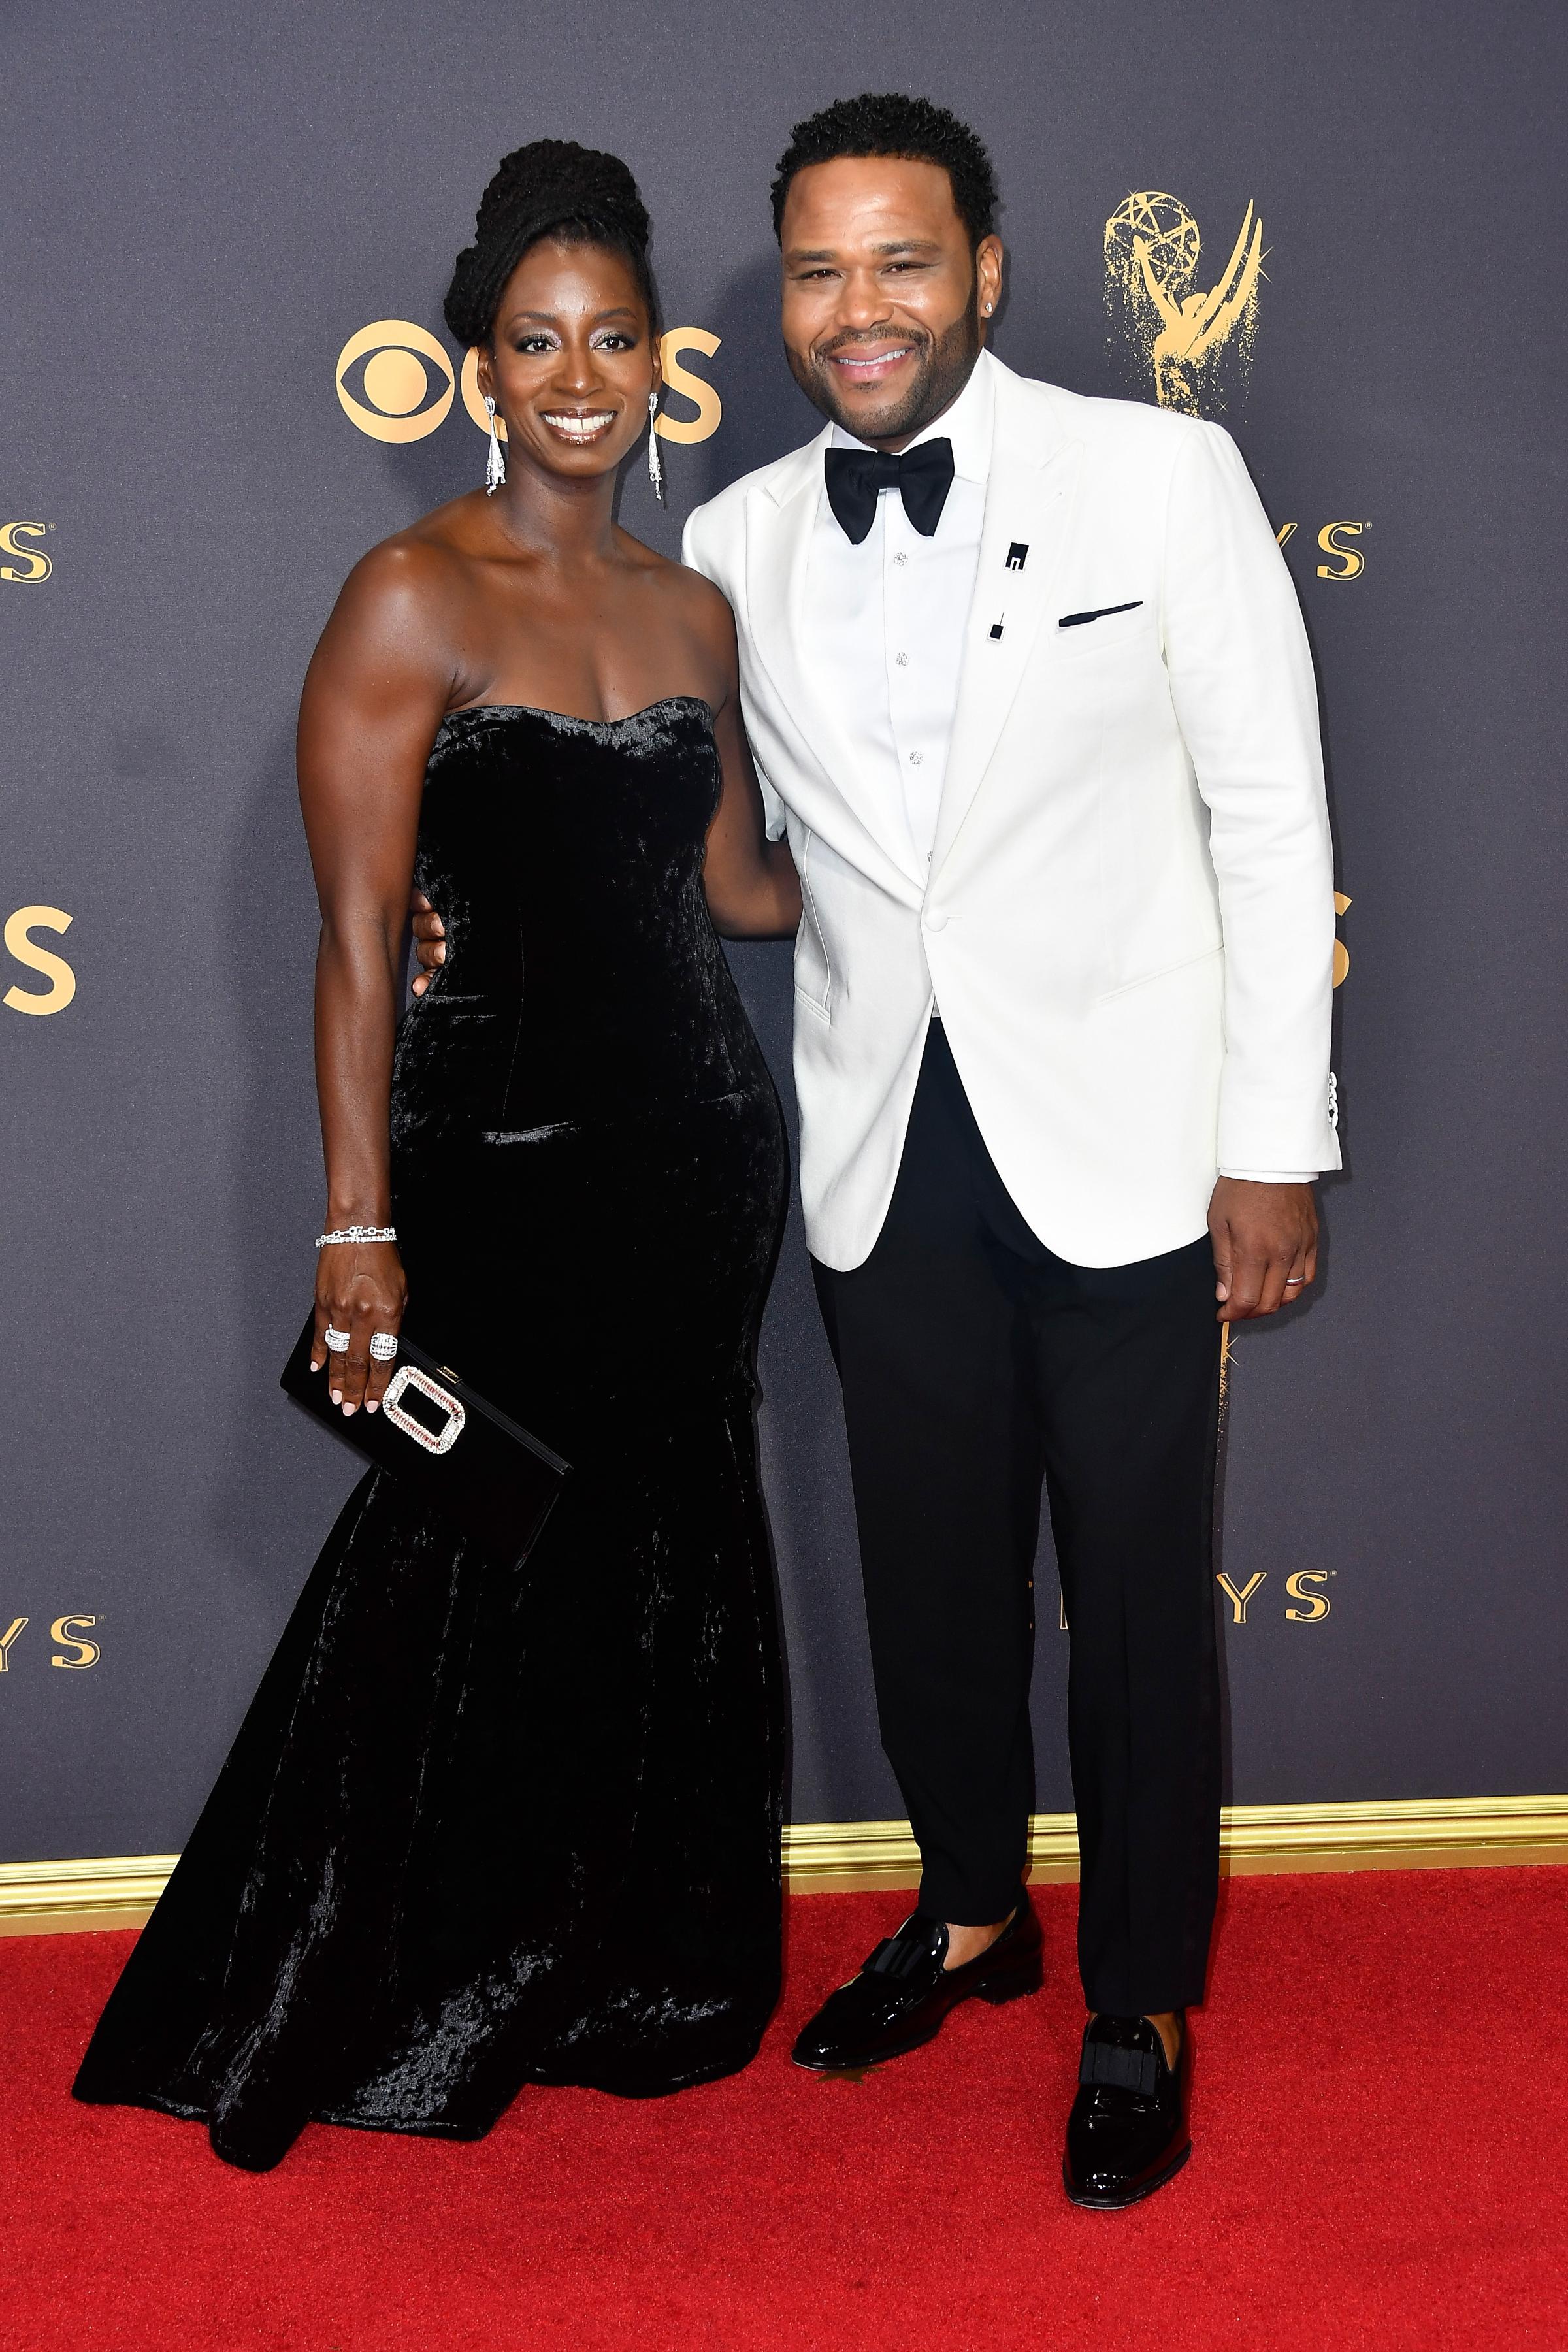 Actor Anthony Anderson (R) and Alvina Stewart attend the 69th Annual Primetime Emmy Awards at Microsoft Theater on September 17, 2017 in Los Angeles, California.